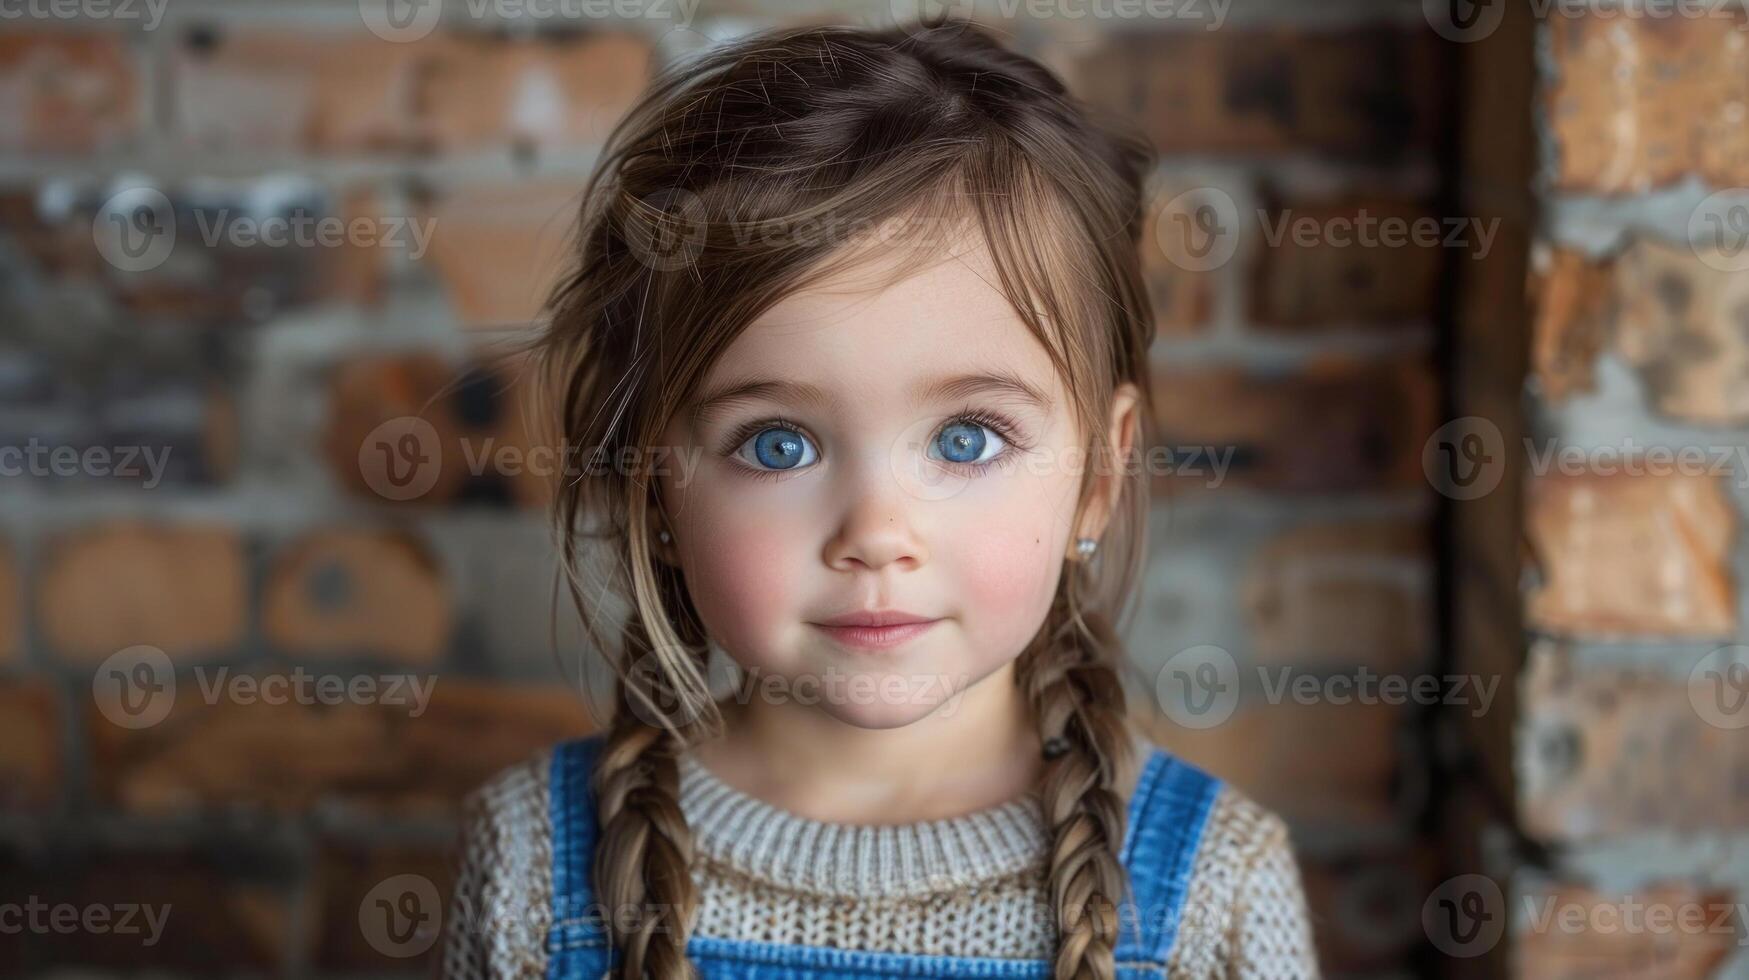 Young girl with braided hair standing by brick wall photo